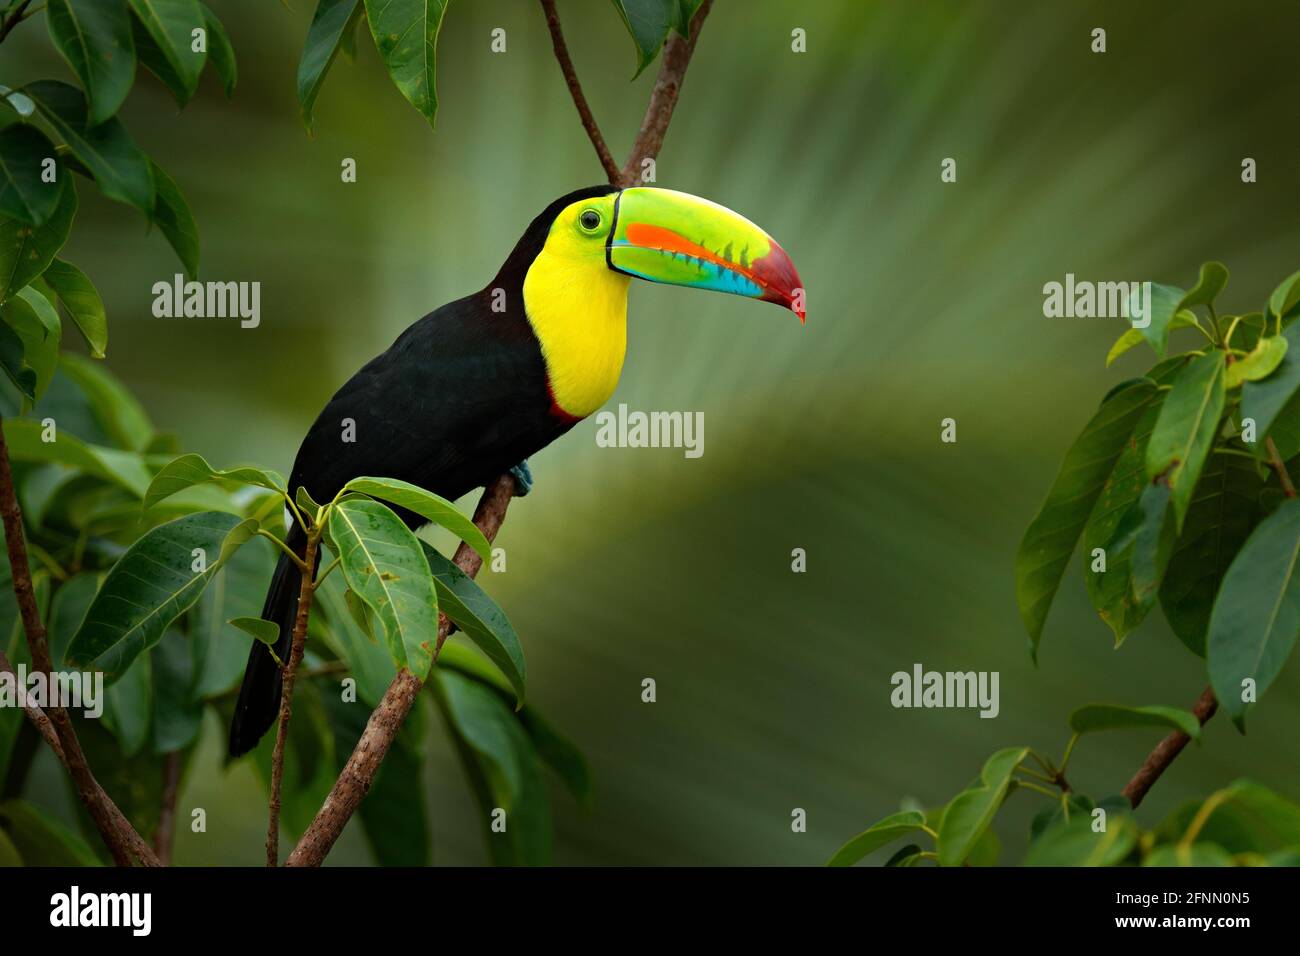 Costa Rica wildlife. Toucan sitting on the branch in the forest, green vegetation. Nature travel holiday in central America. Keel-billed Toucan, Ramph Stock Photo